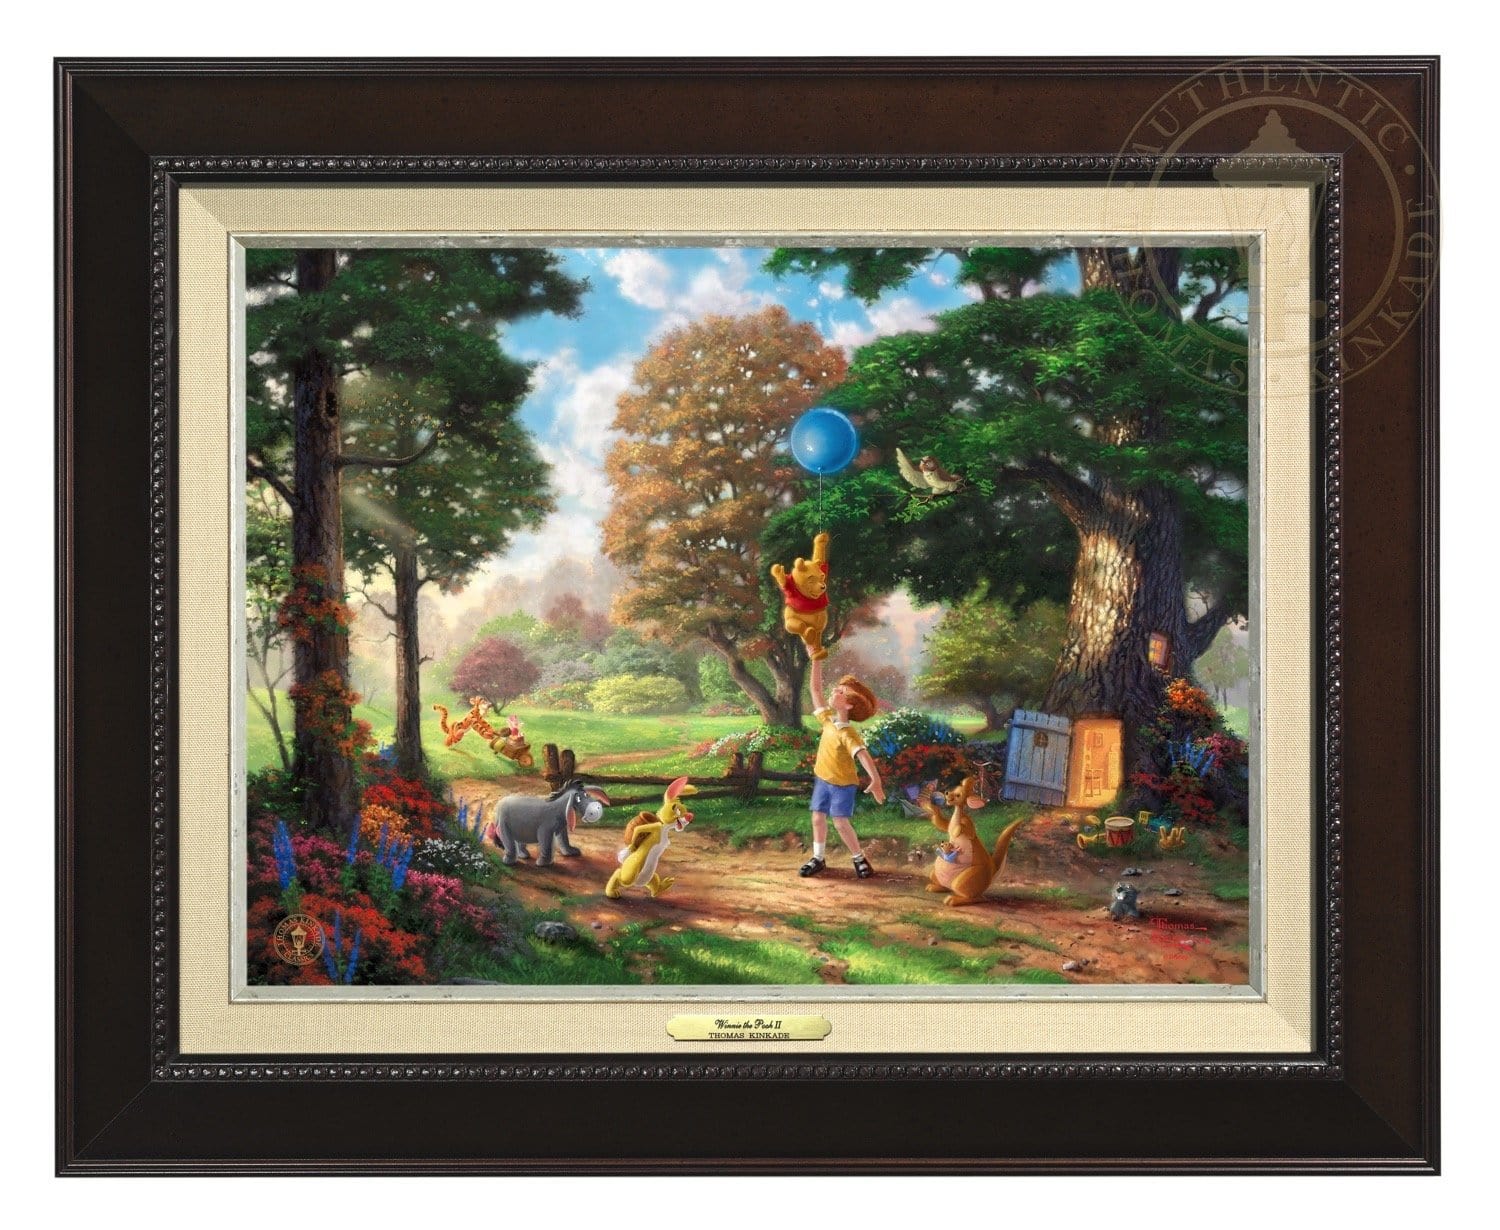 Winnie the Pooh II - Christopher Robin, Winnie the Pooh and the delightful menagerie of friends as they all adventured in the Hundred Acre Wood - Espresso  Frame.